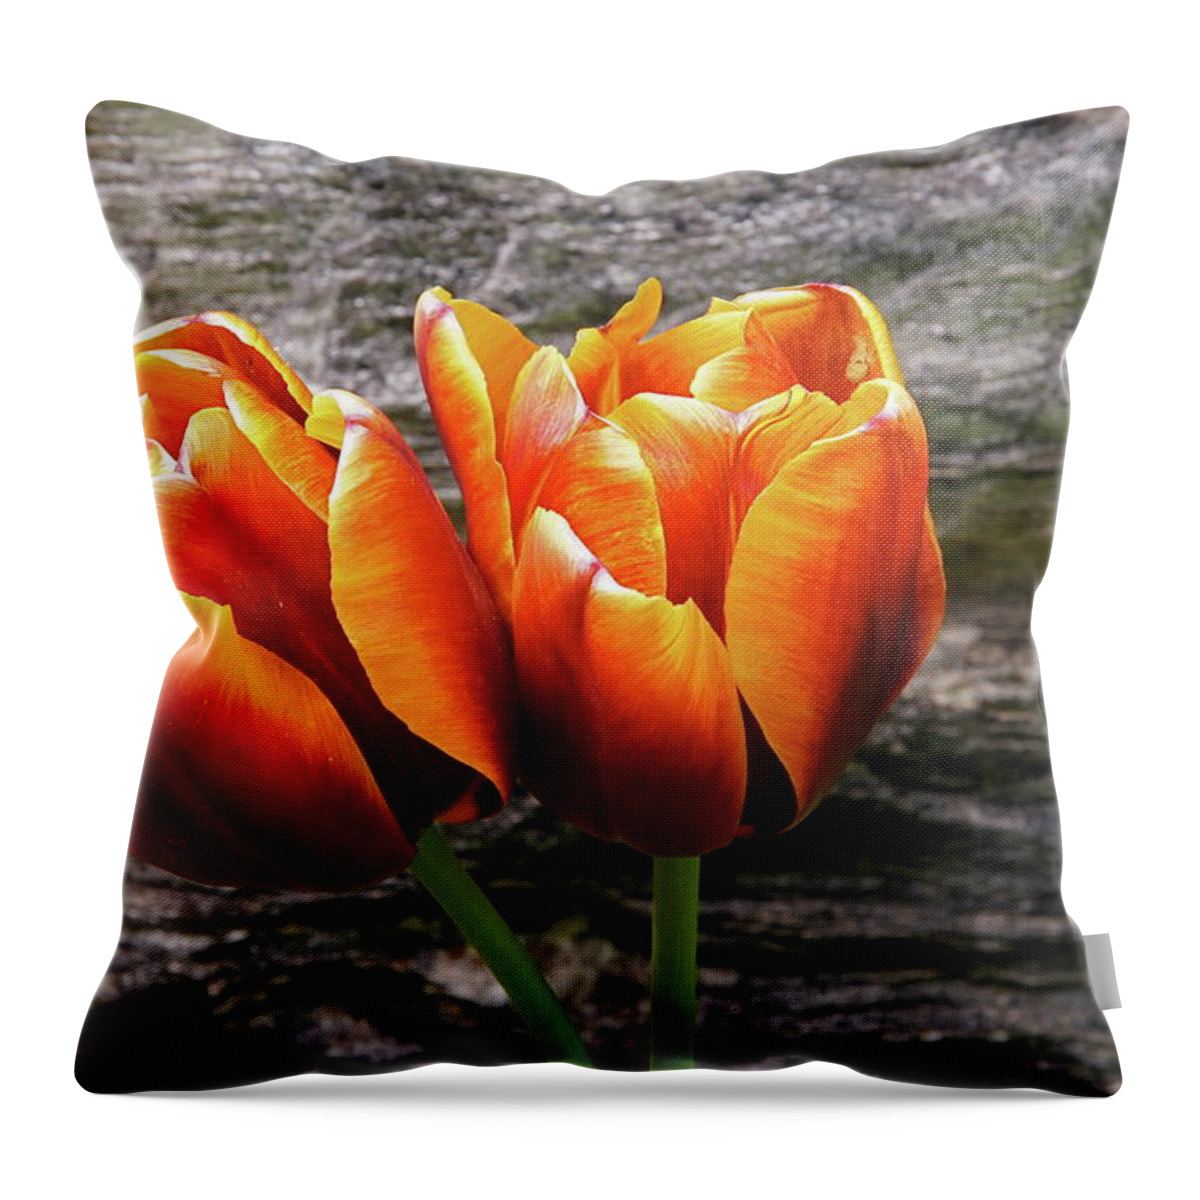 Floral Throw Pillow featuring the photograph Two Tulips And Stone by Byron Varvarigos